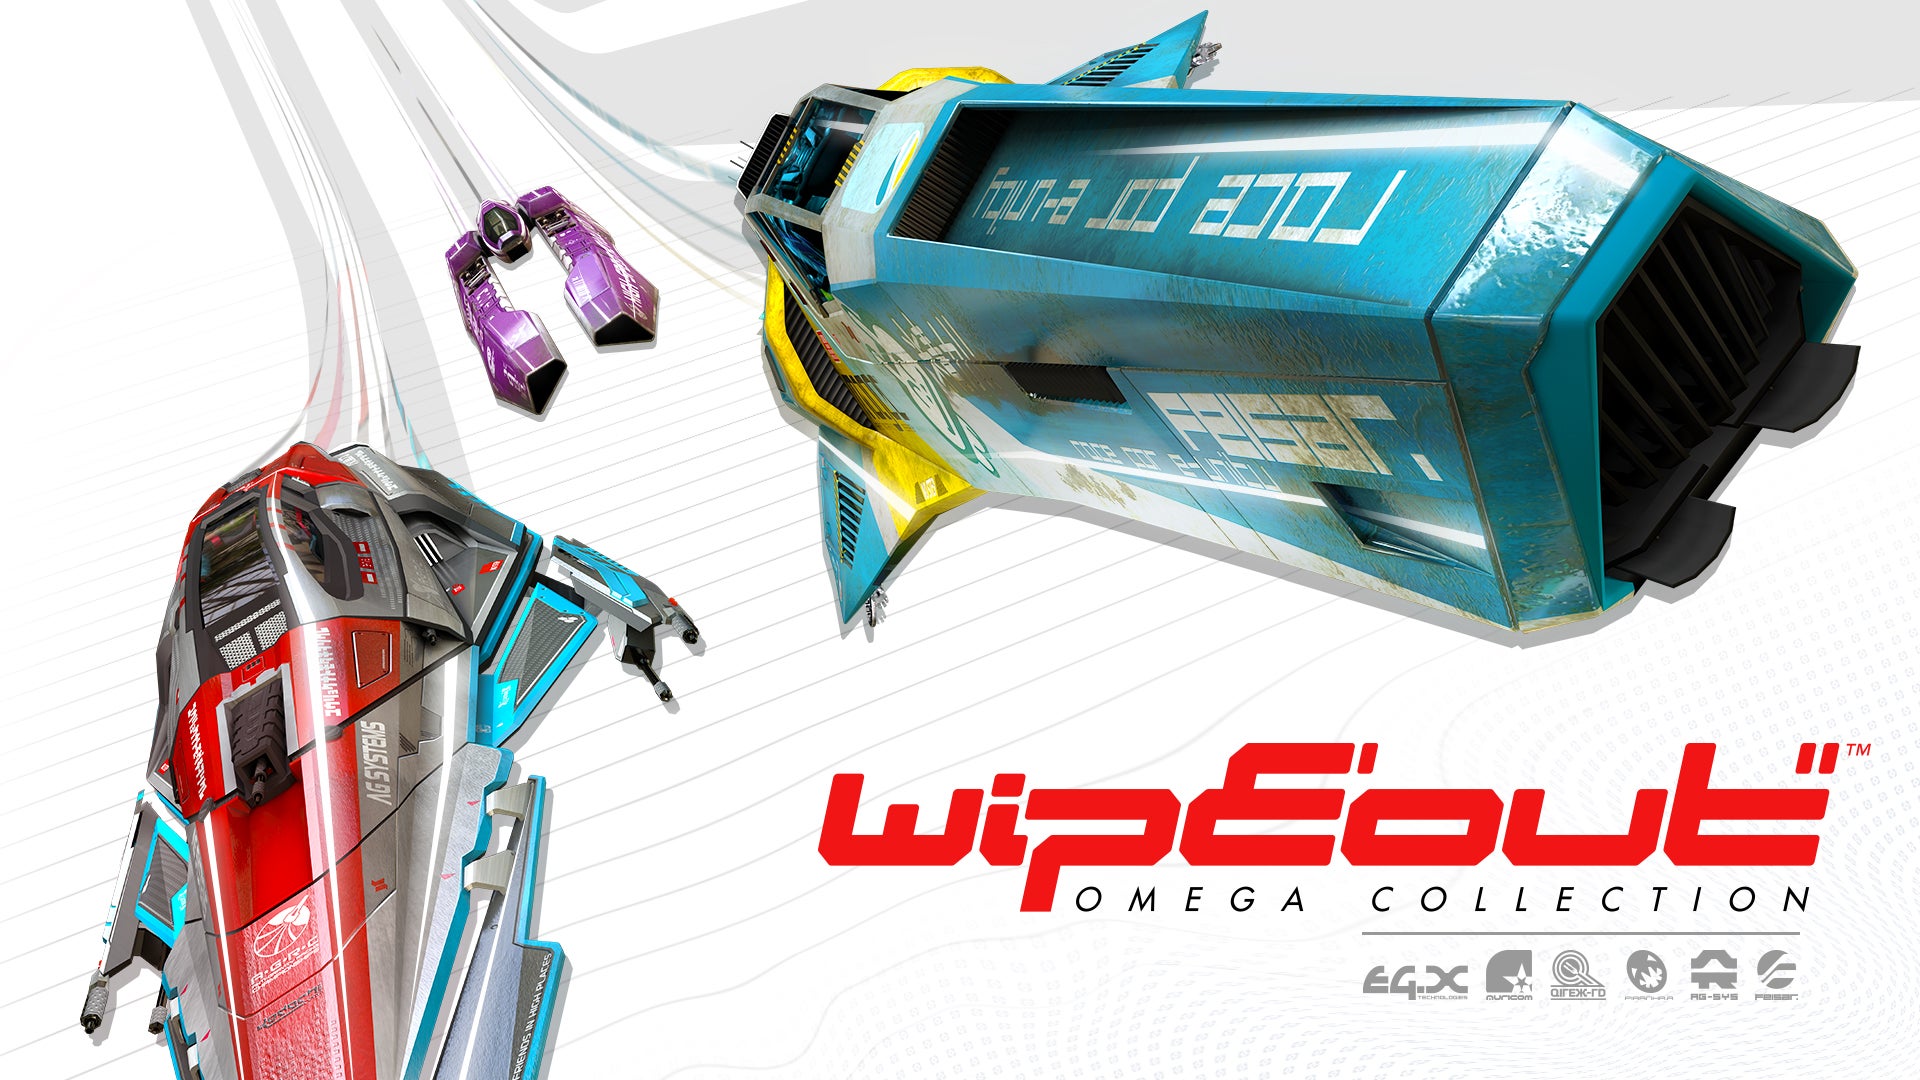 Imagen para Gameplay de WipEout Omega Collection